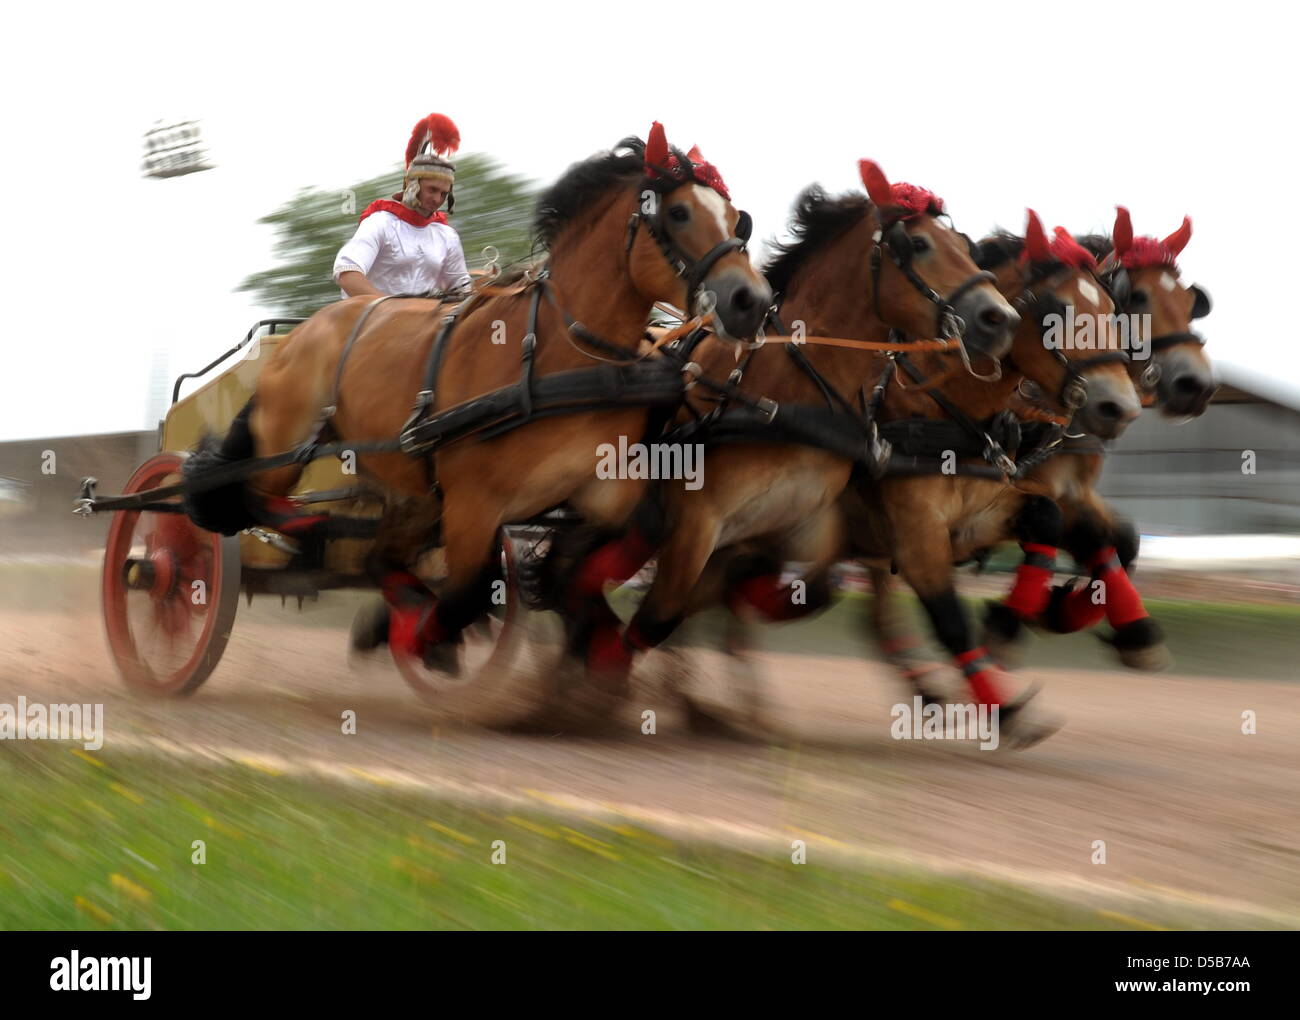 A charioteer races in his chariot as it is dragged by four horses at the harness racing track in Berlin, Germany, 08 August 2010. For the title of the fastest chariot, seventeen participants competed. Photo: Tim Brakemeier Stock Photo